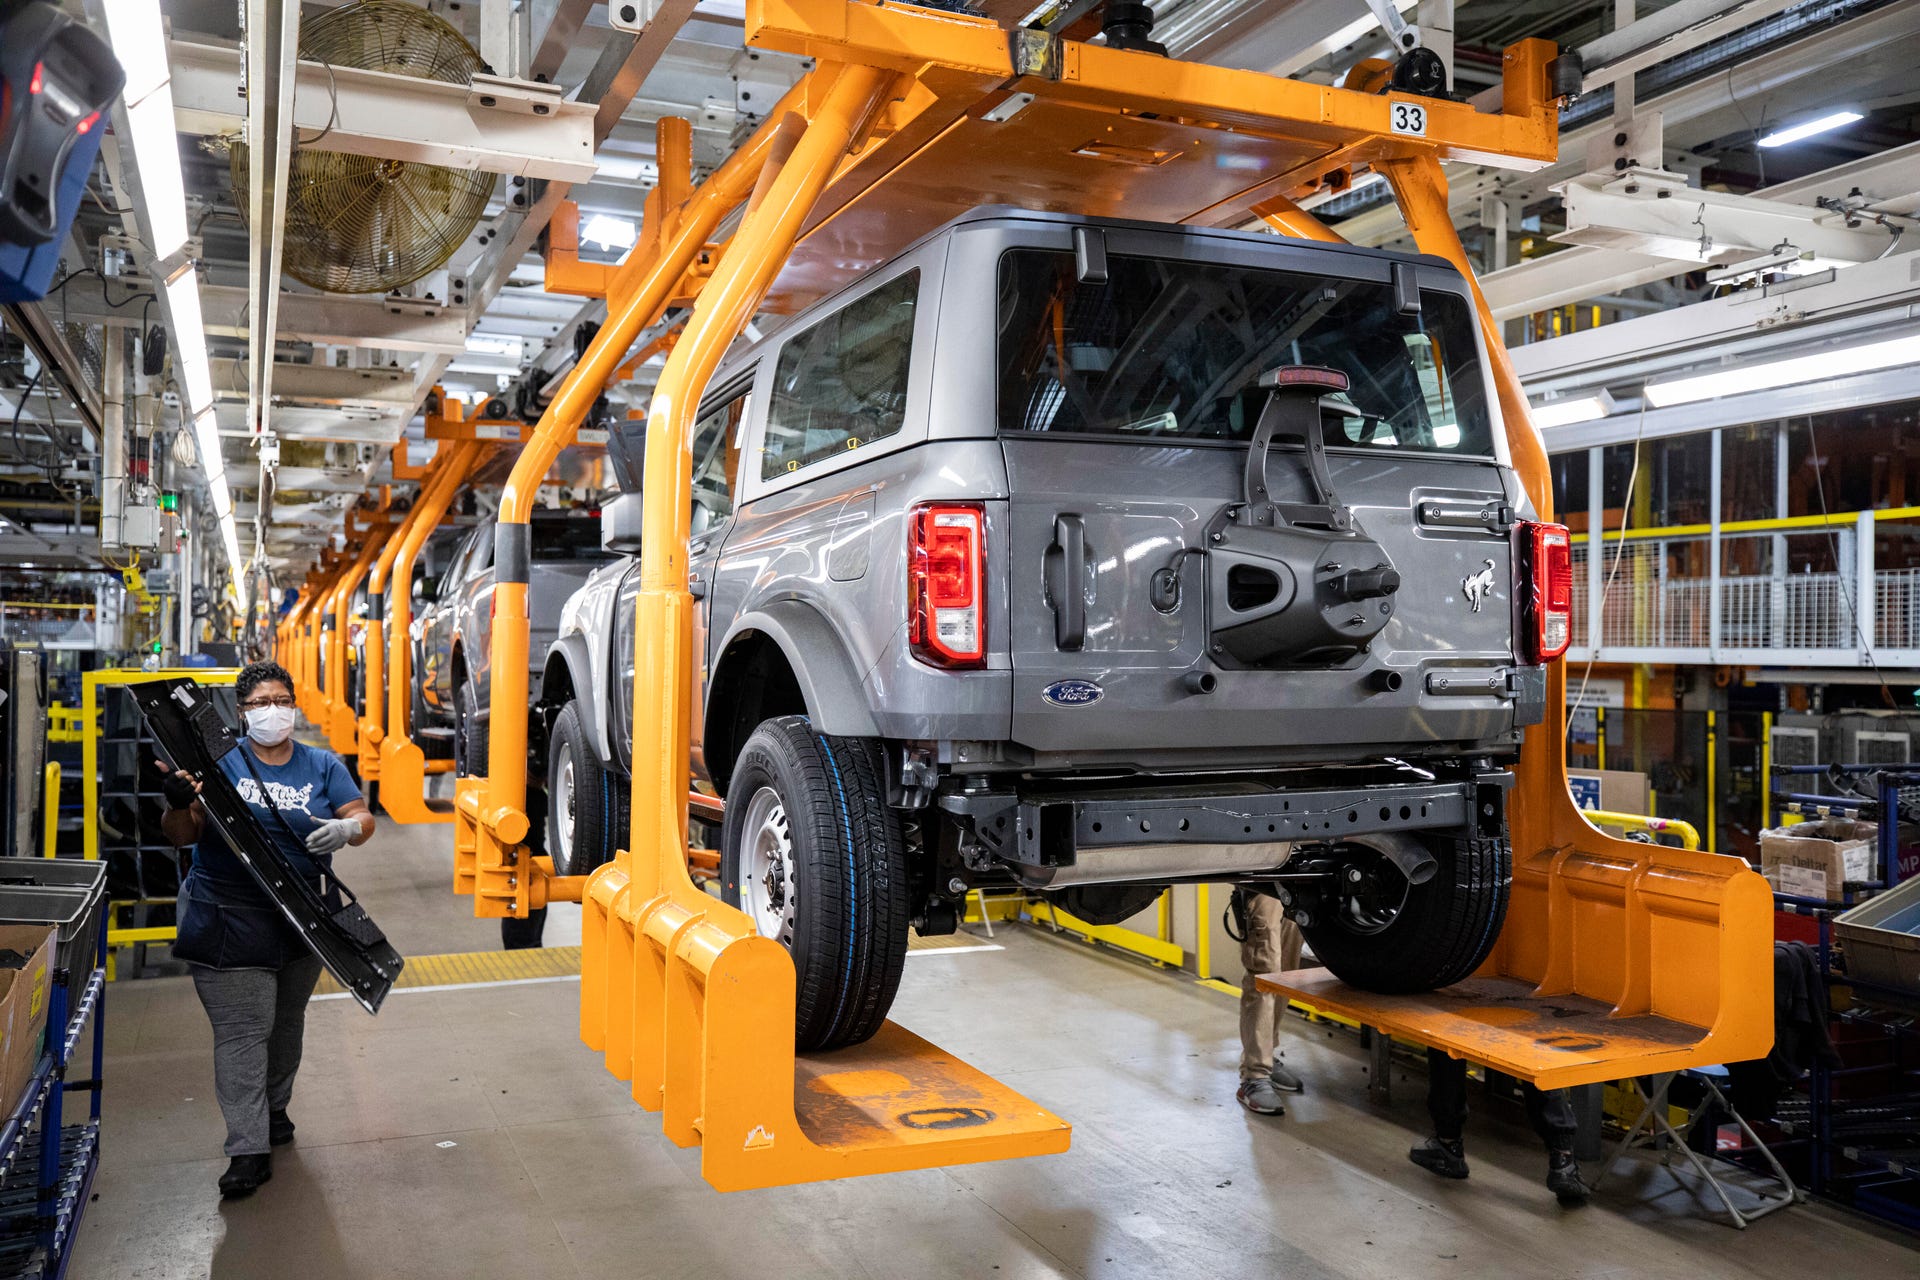 2021 Ford Bronco production line